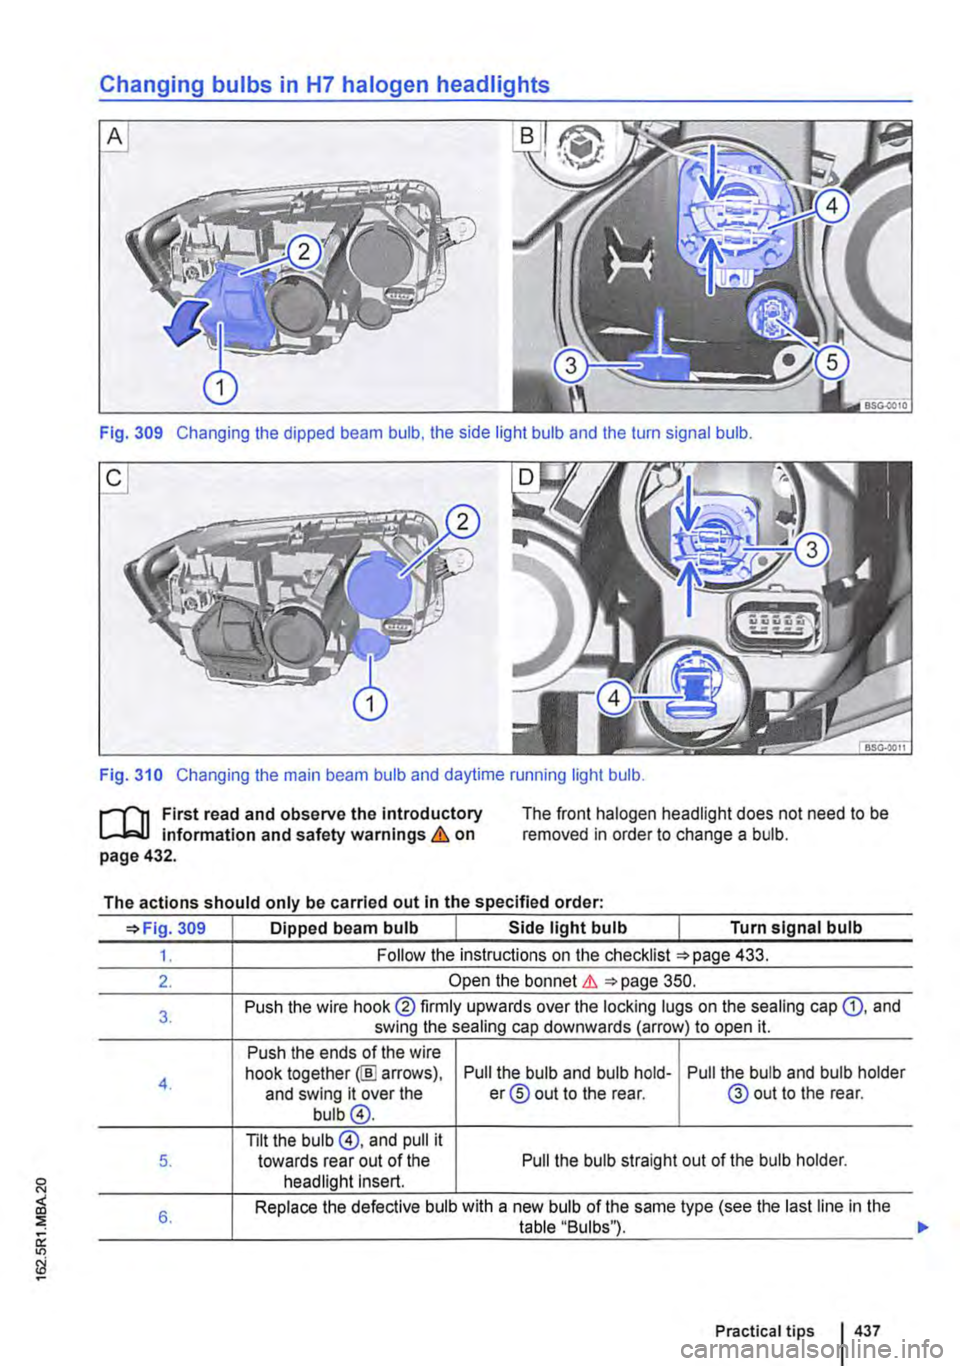 VOLKSWAGEN TRANSPORTER 2020  Owners Manual Changing bulbs in H7 halogen headlights 
Fig. 309 Changing the dipped beam bulb, the side light bulb and the turn signal bulb. 
Fig. 310 Changing the main beam bulb and daytime running light bulb. 
l"